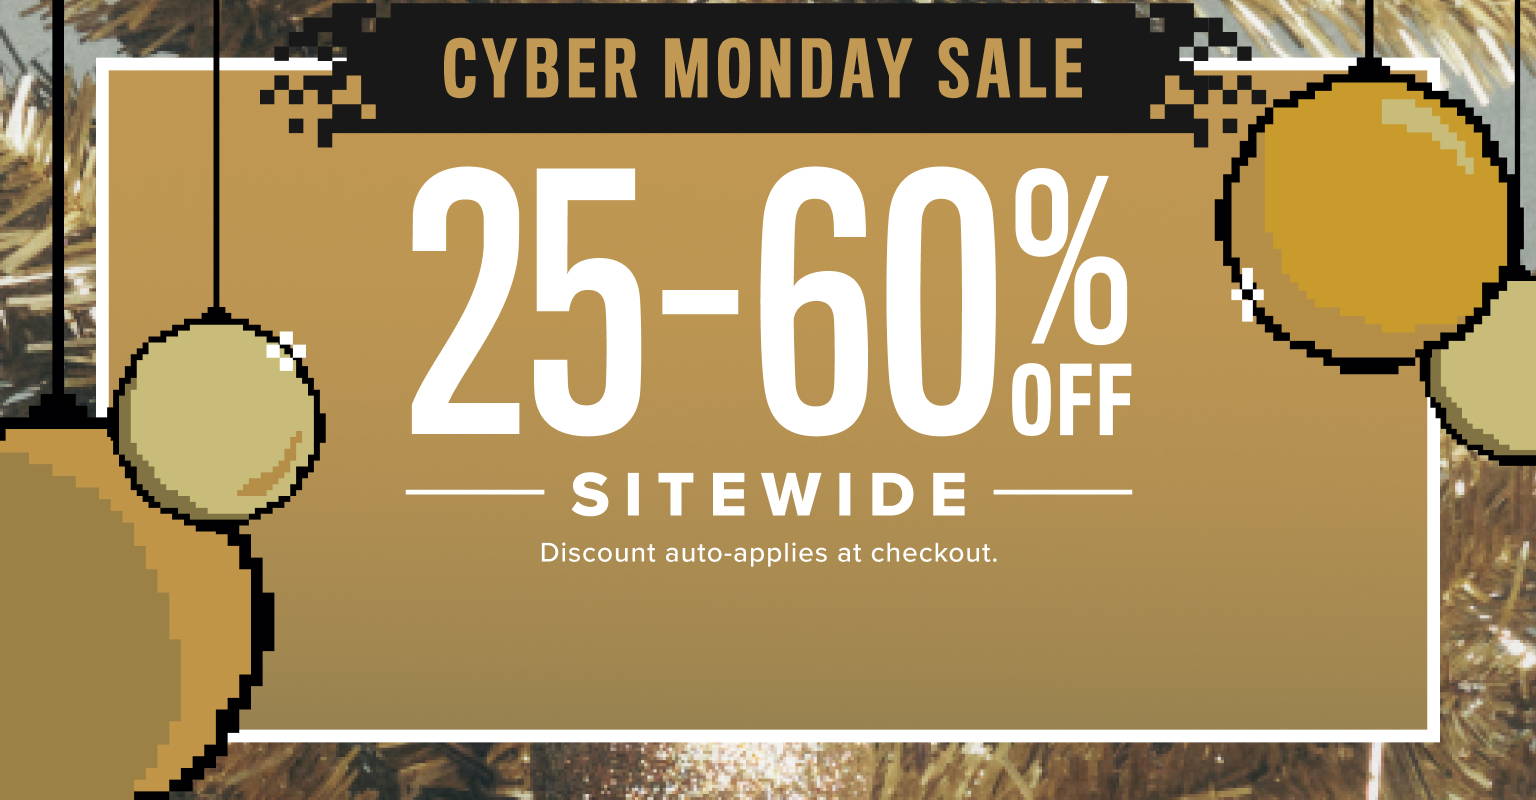  Cyber Monday Sale. Up To 25-60% Off sitewide. Discont auto-applies at checkout.